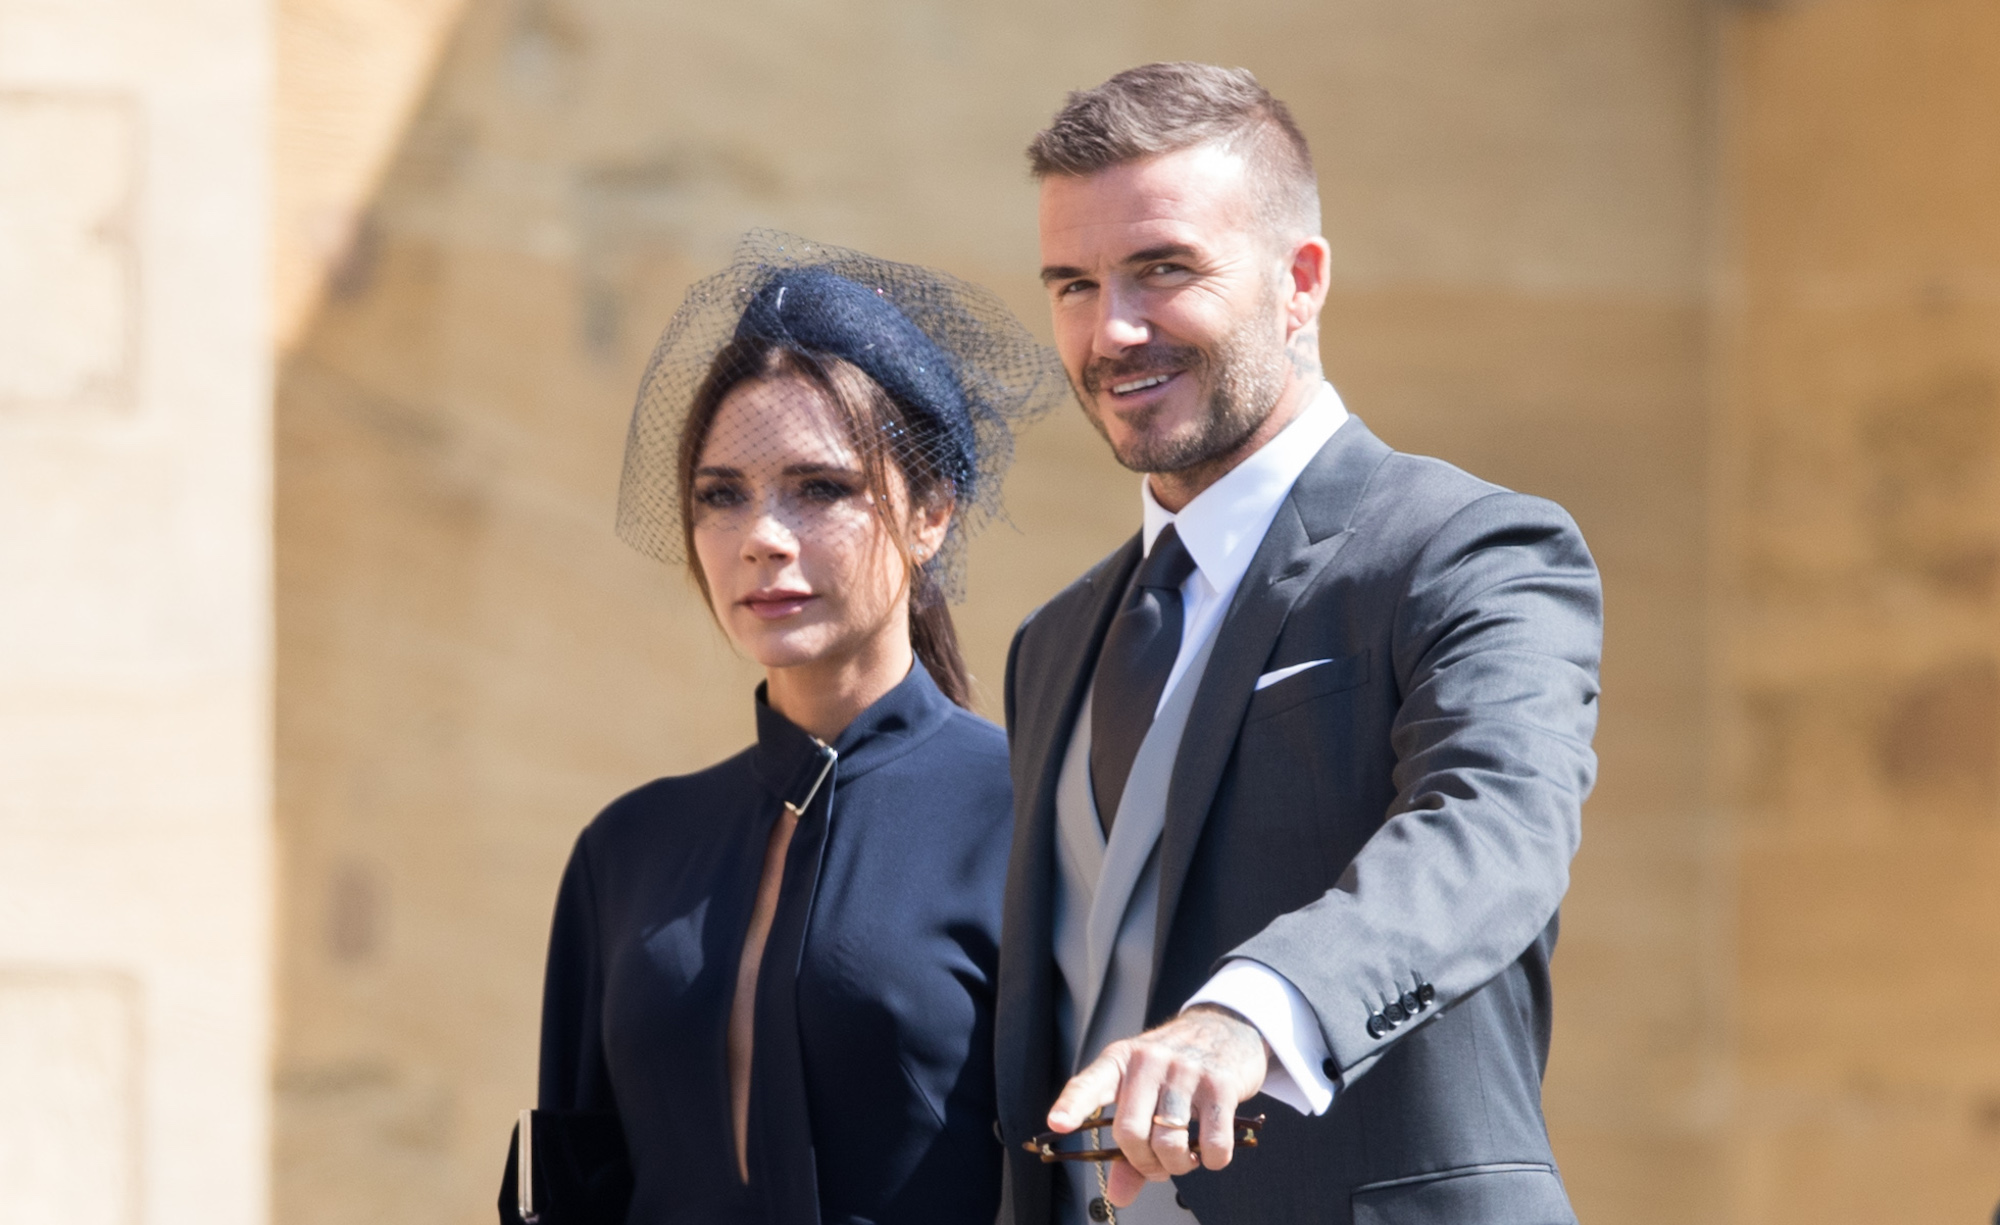 Victoria & David Beckham Coordinate In Black Outfits While Out